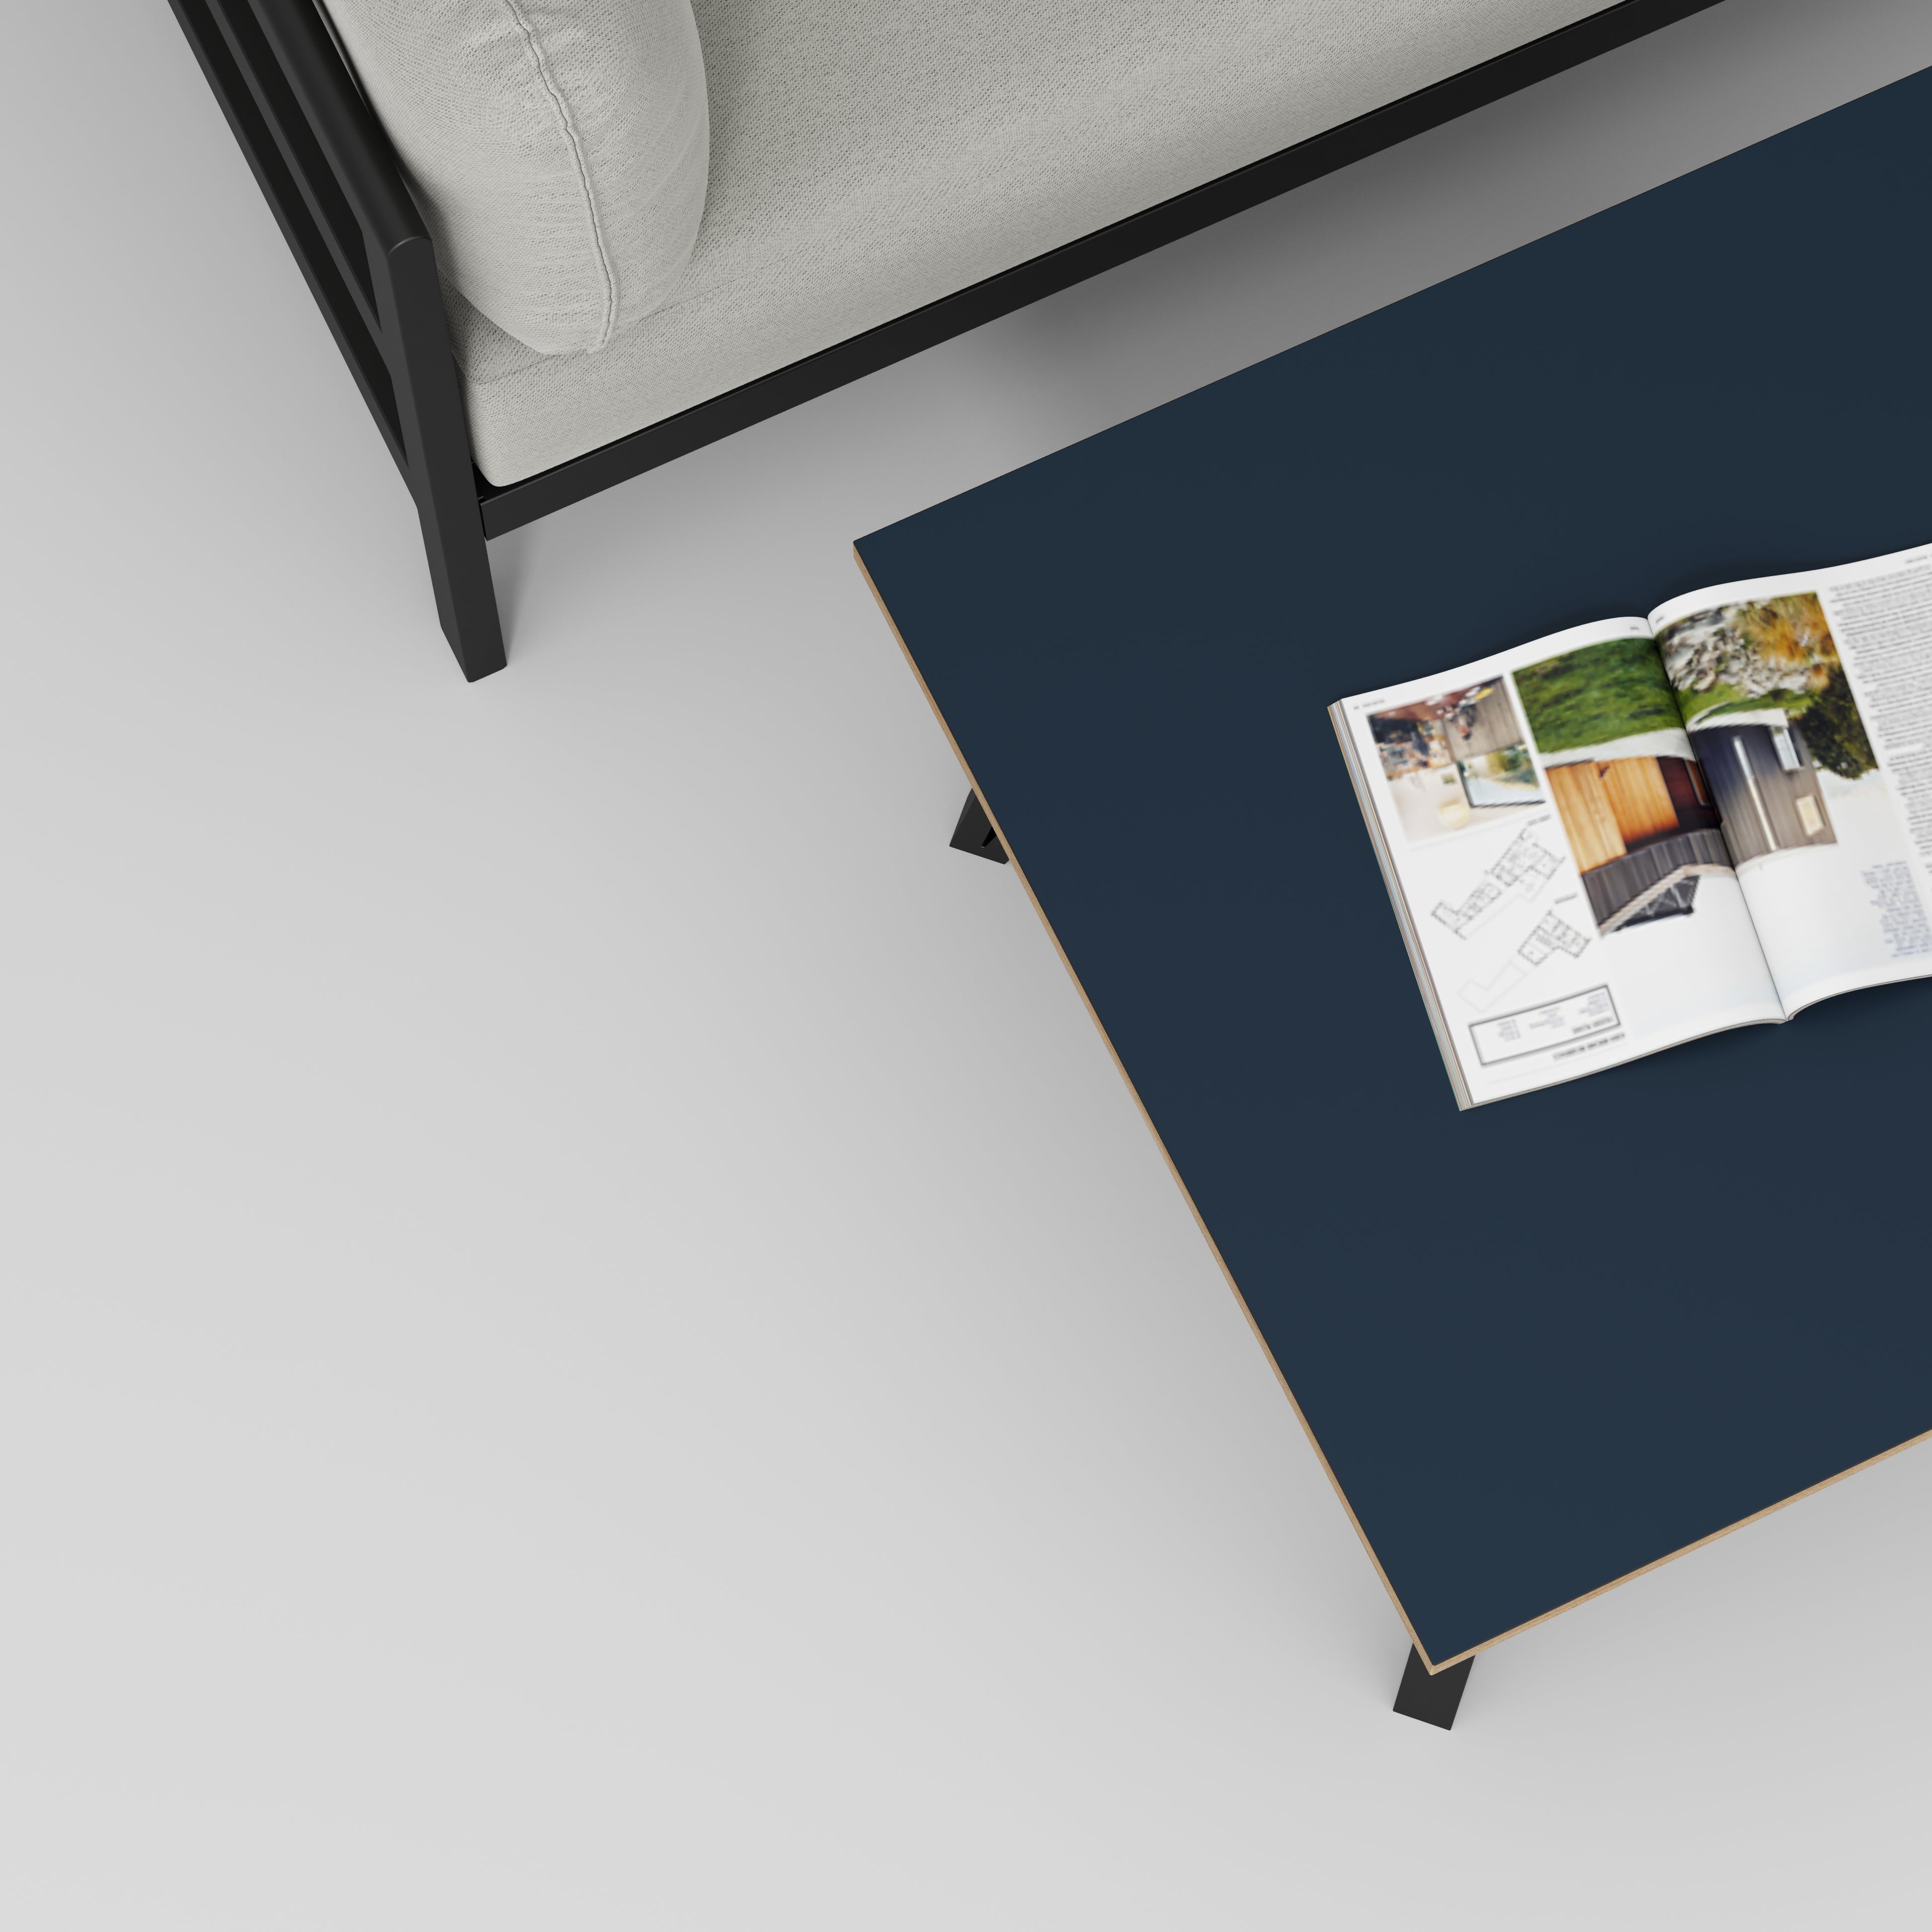 Coffee Table with Black Box Hairpin Legs - Formica Night Sea Blue - 800(w) x 800(d) x 425(h)